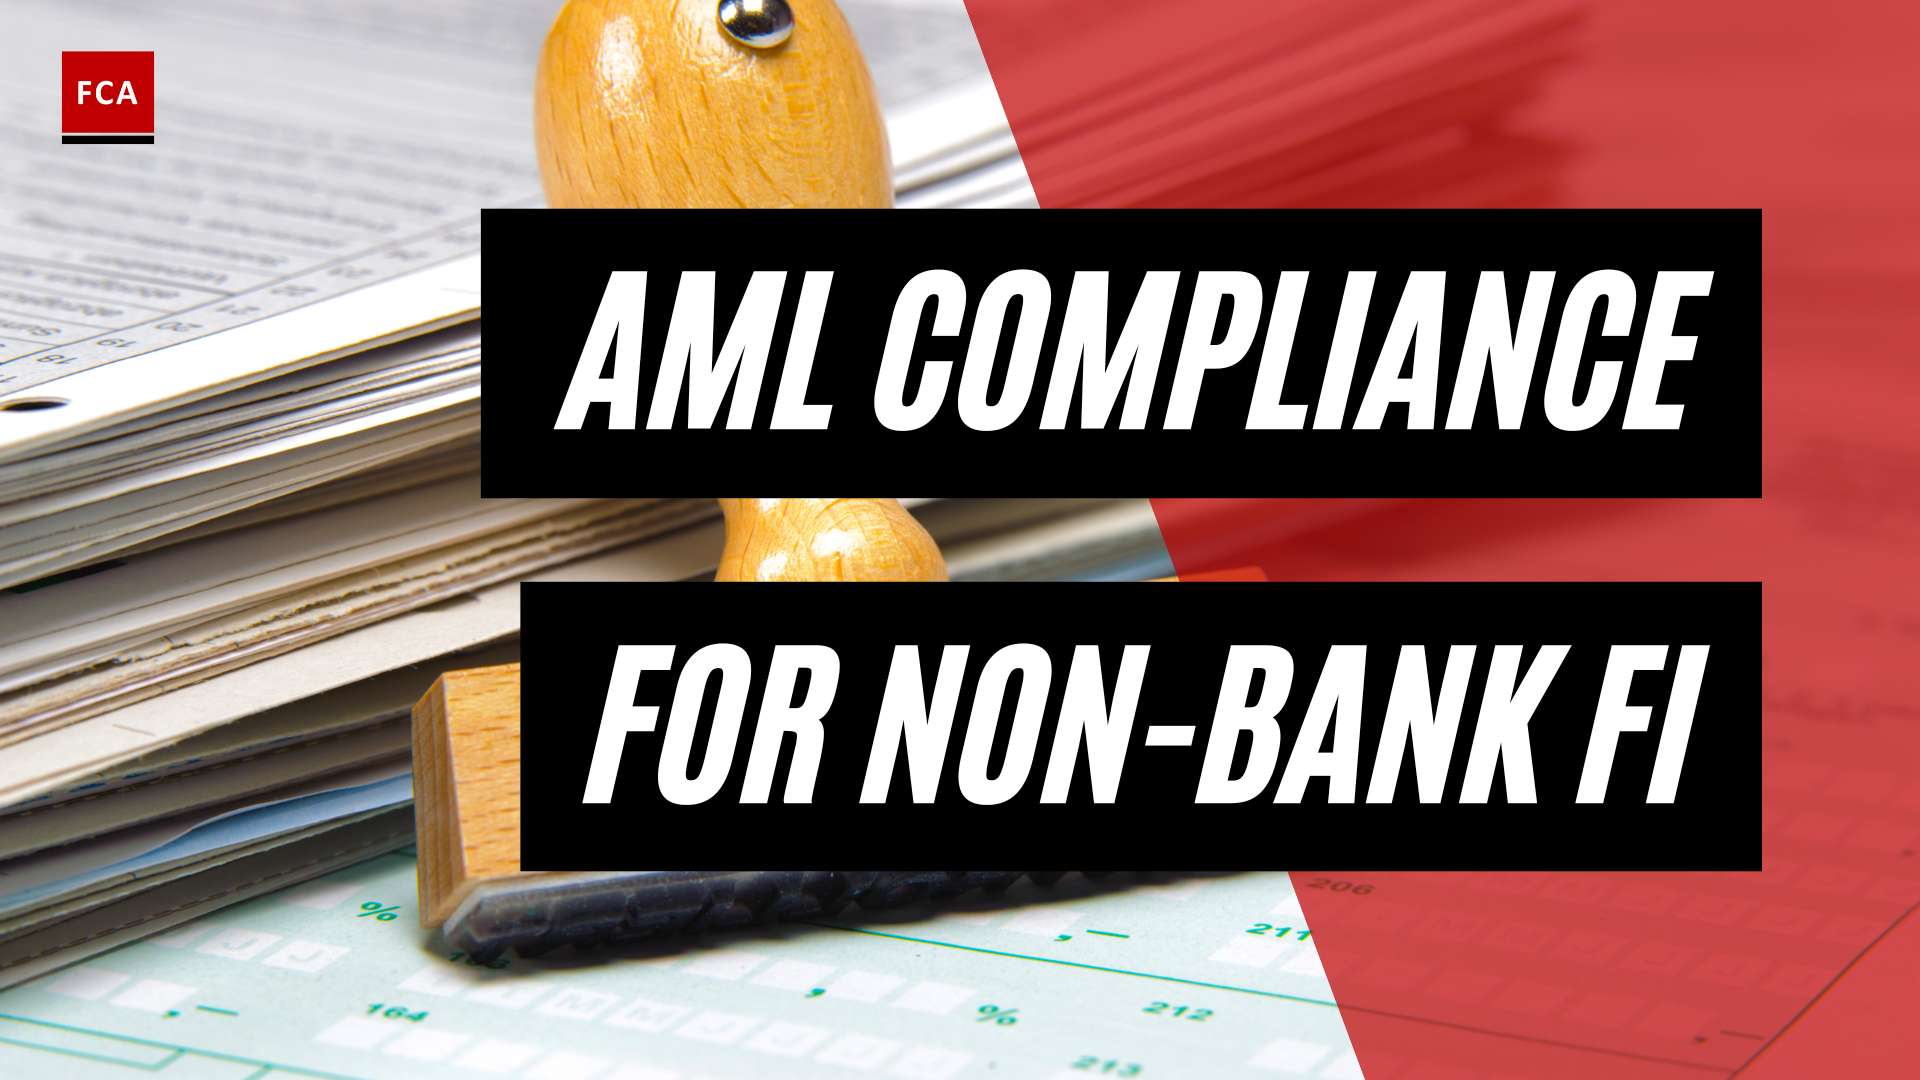 Safeguarding Against Financial Crime: Aml Compliance For Non-Bank Financial Institutions